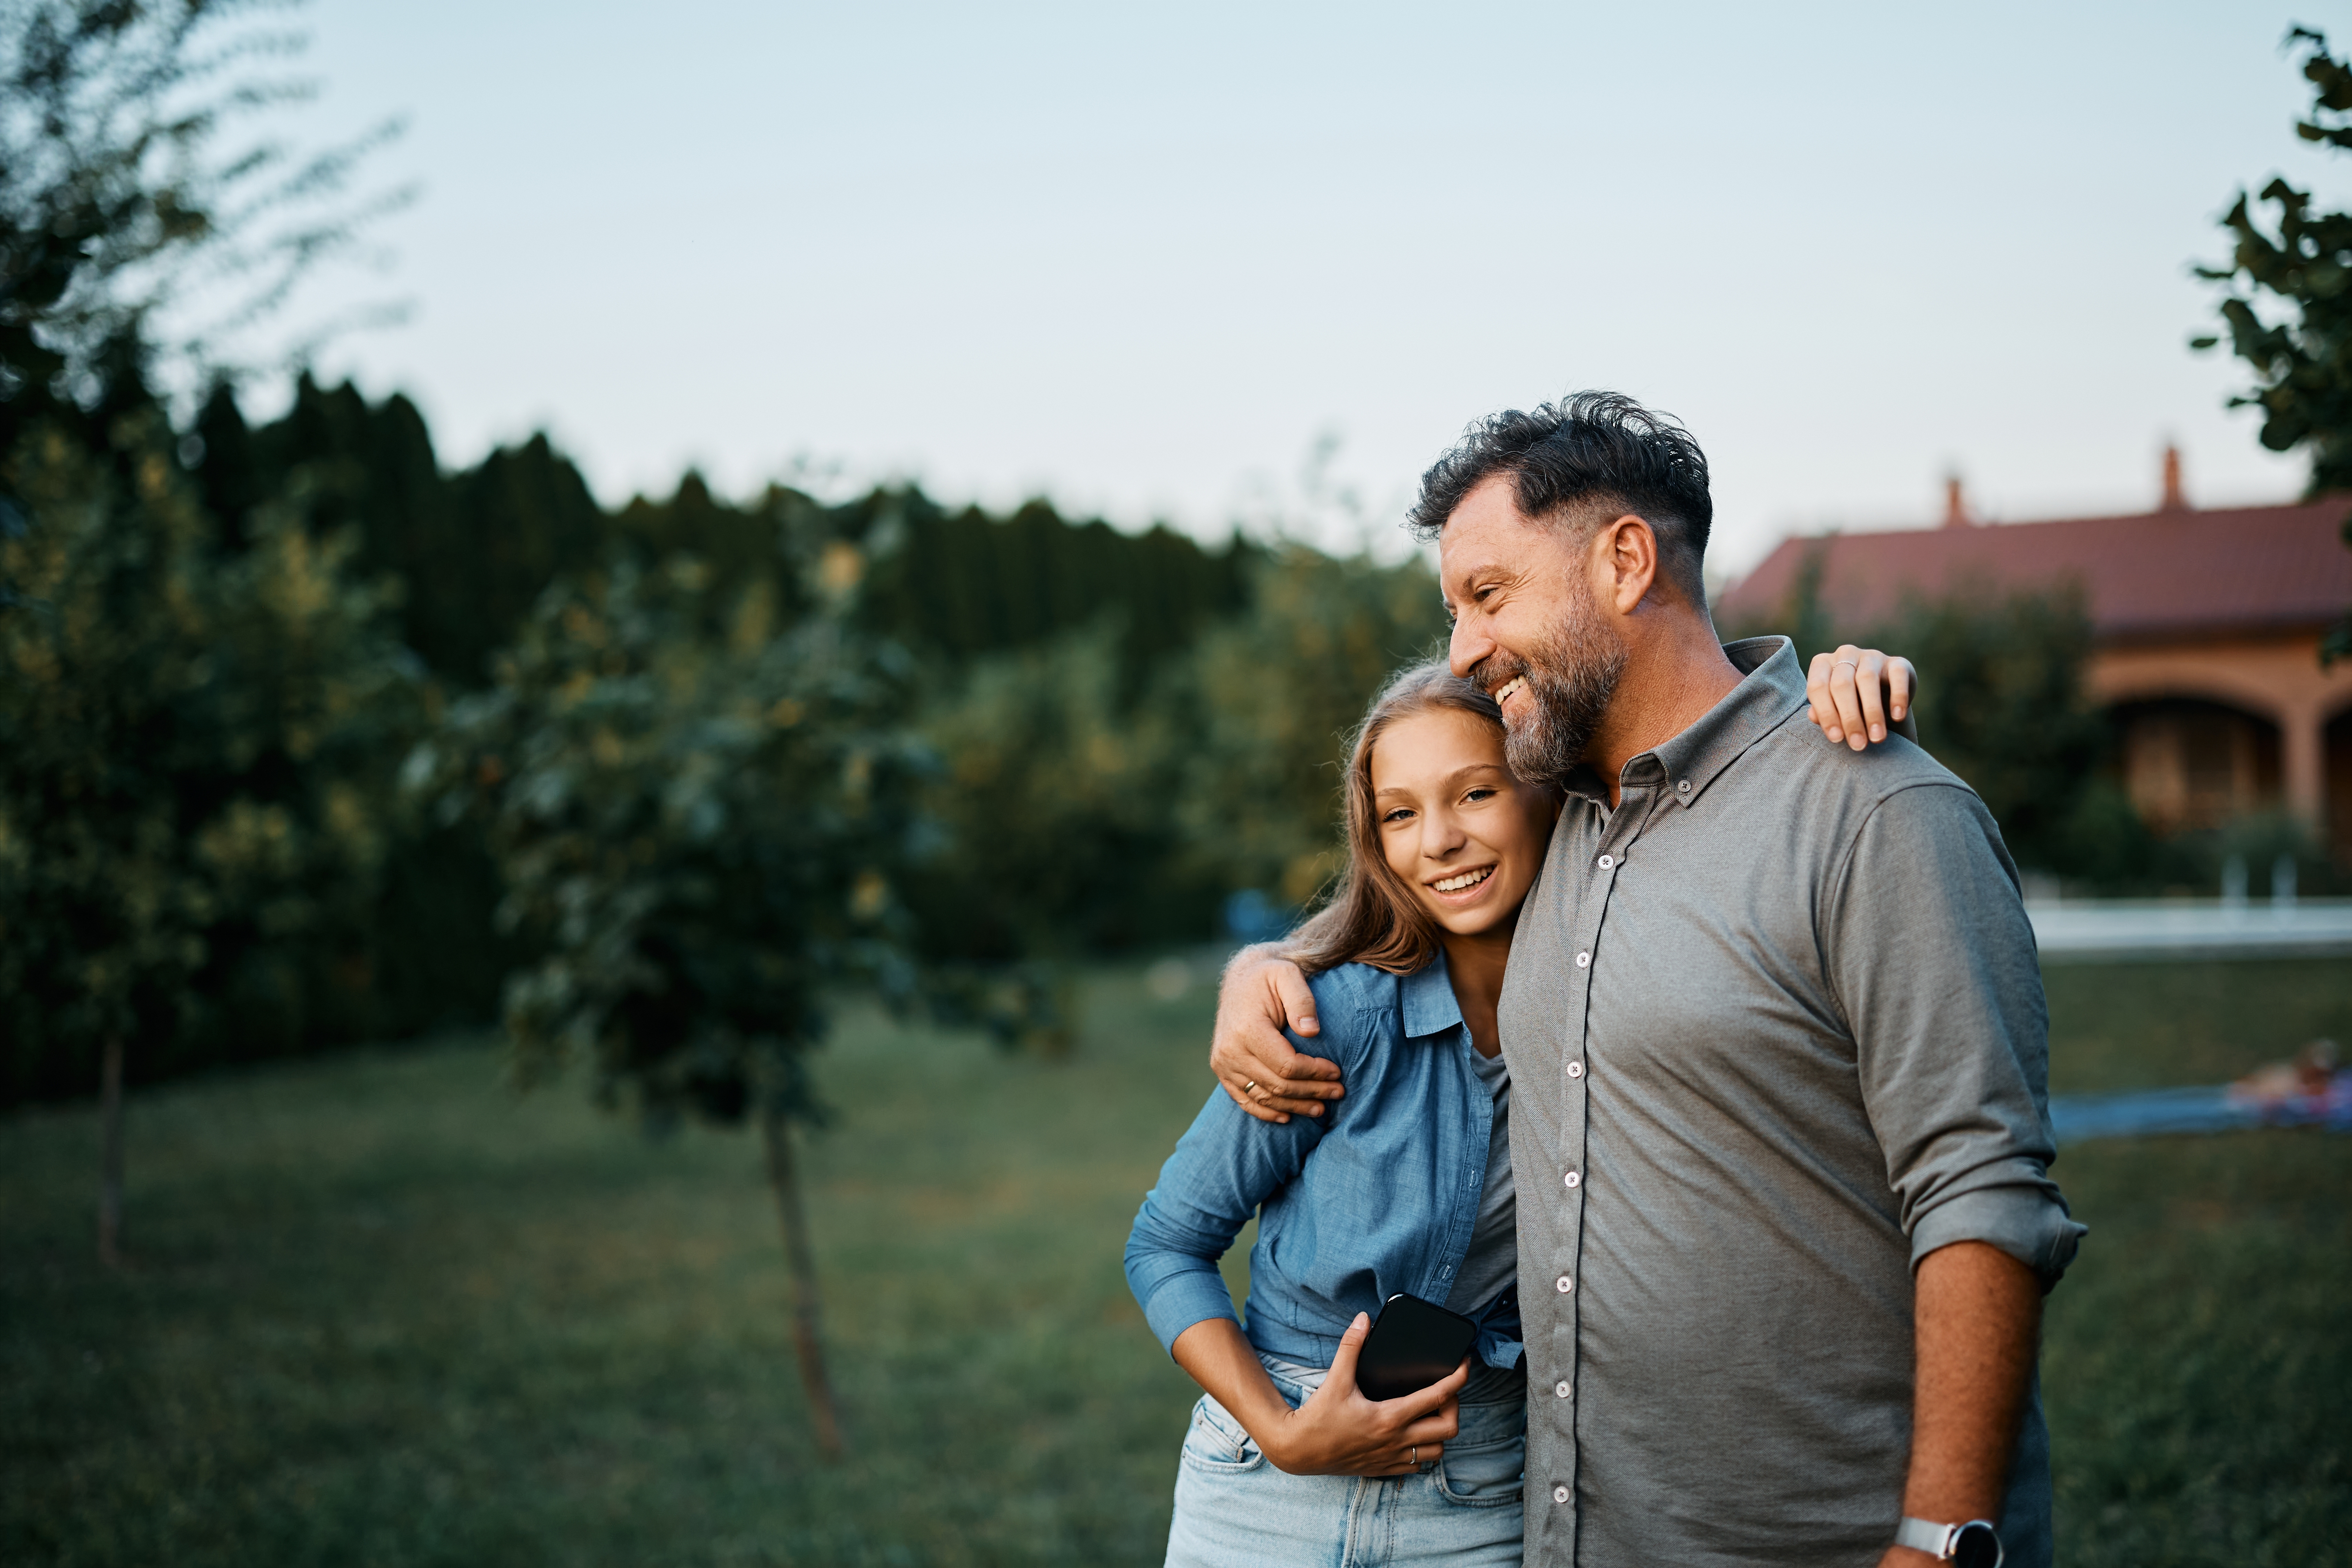 A happy father hugs his teenage daughter in the backyard | Source: Shutterstock